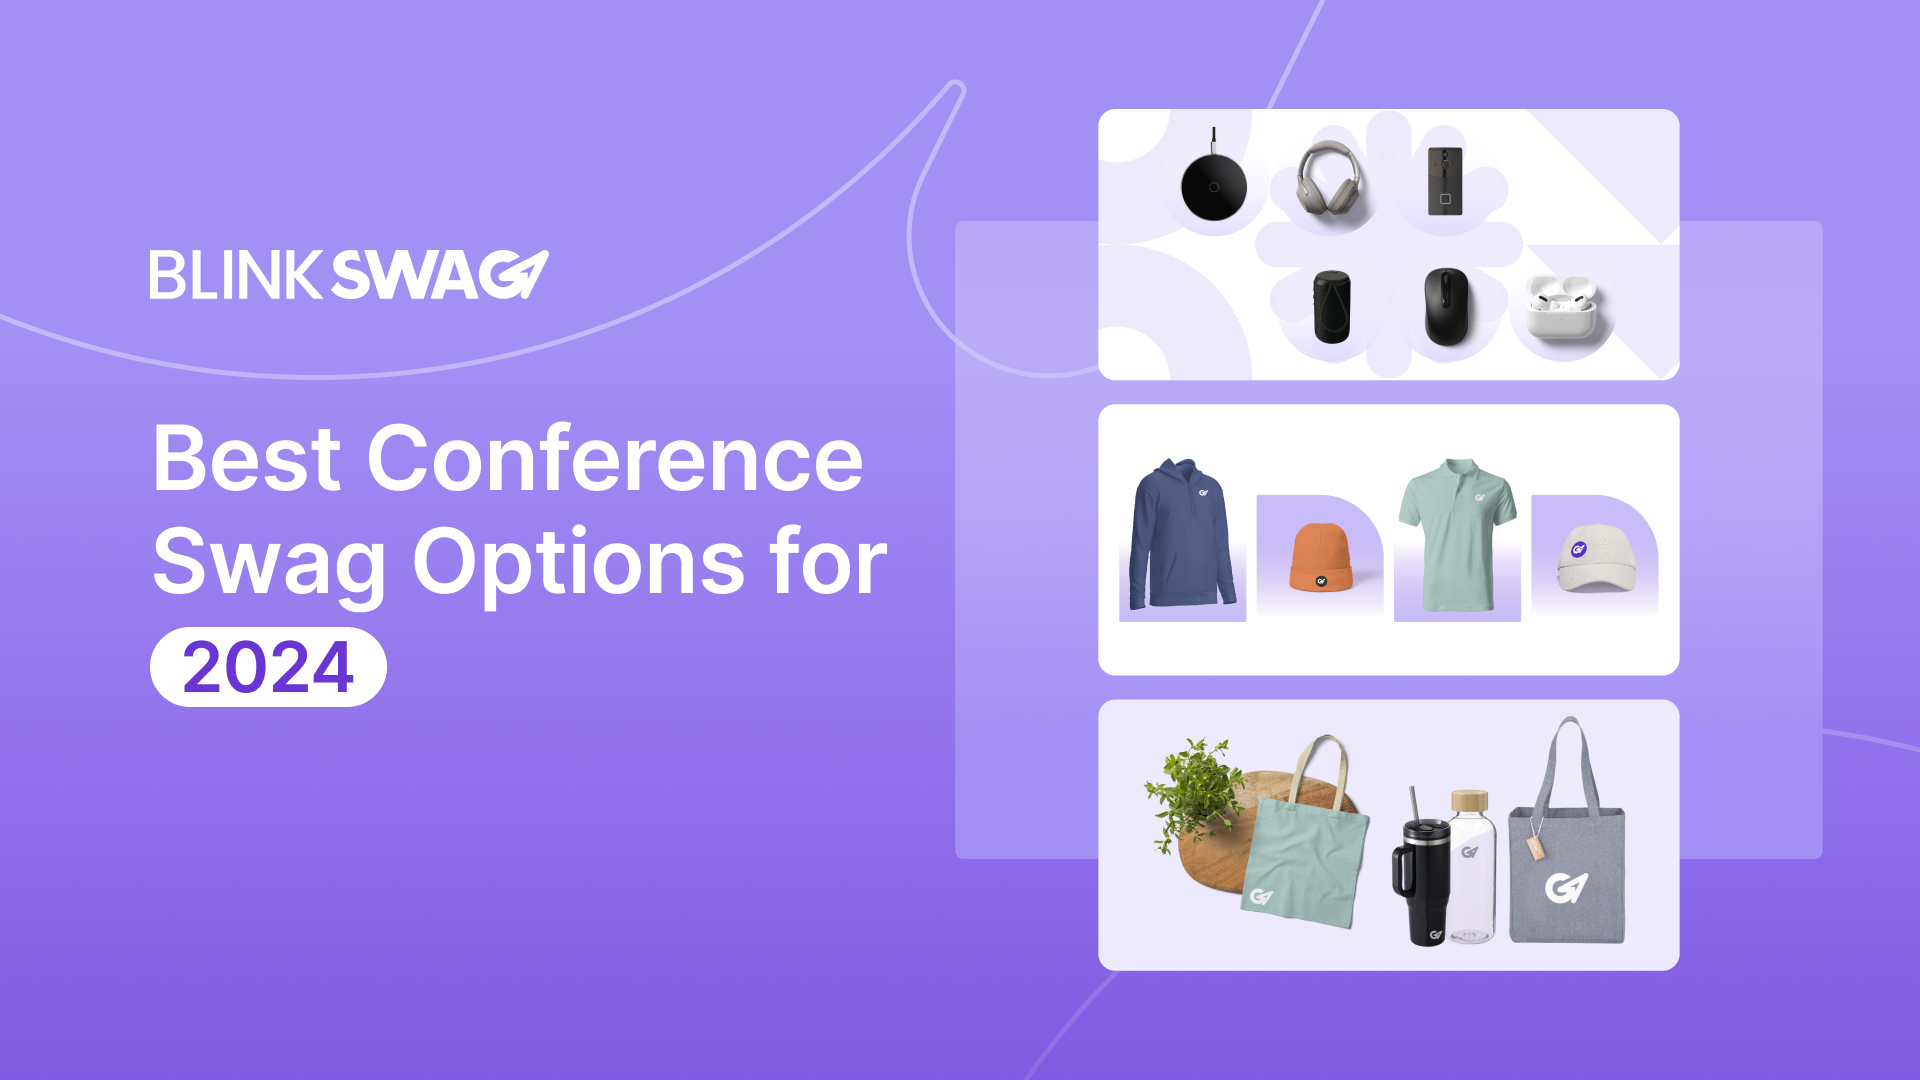 Best Conference Swag Options for 2024